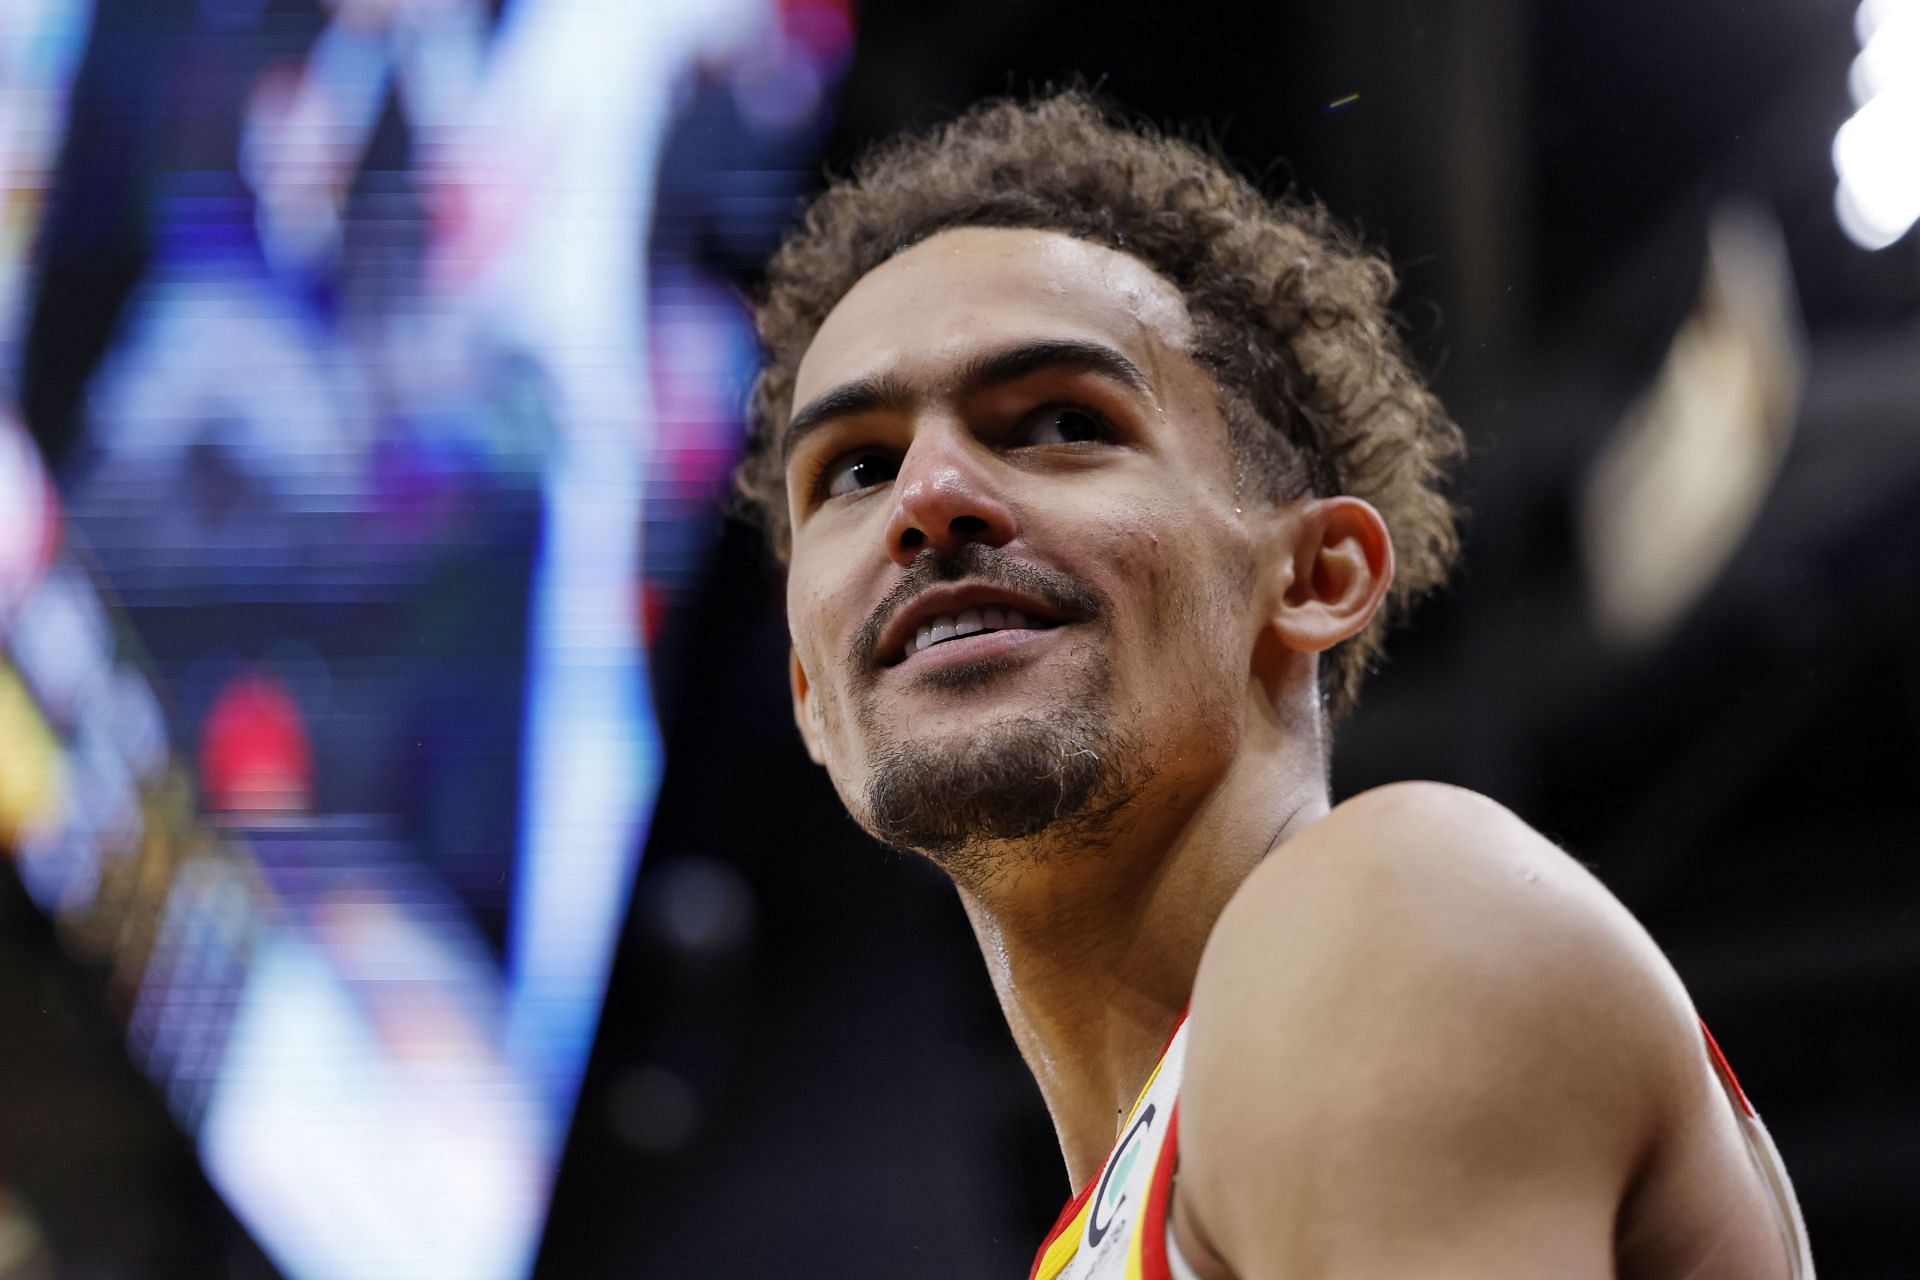 Trae Young #11 of the Atlanta Hawks reacts during the second half against the Cleveland Cavaliers at Rocket Mortgage Fieldhouse on April 15, 2022 in Cleveland, Ohio.